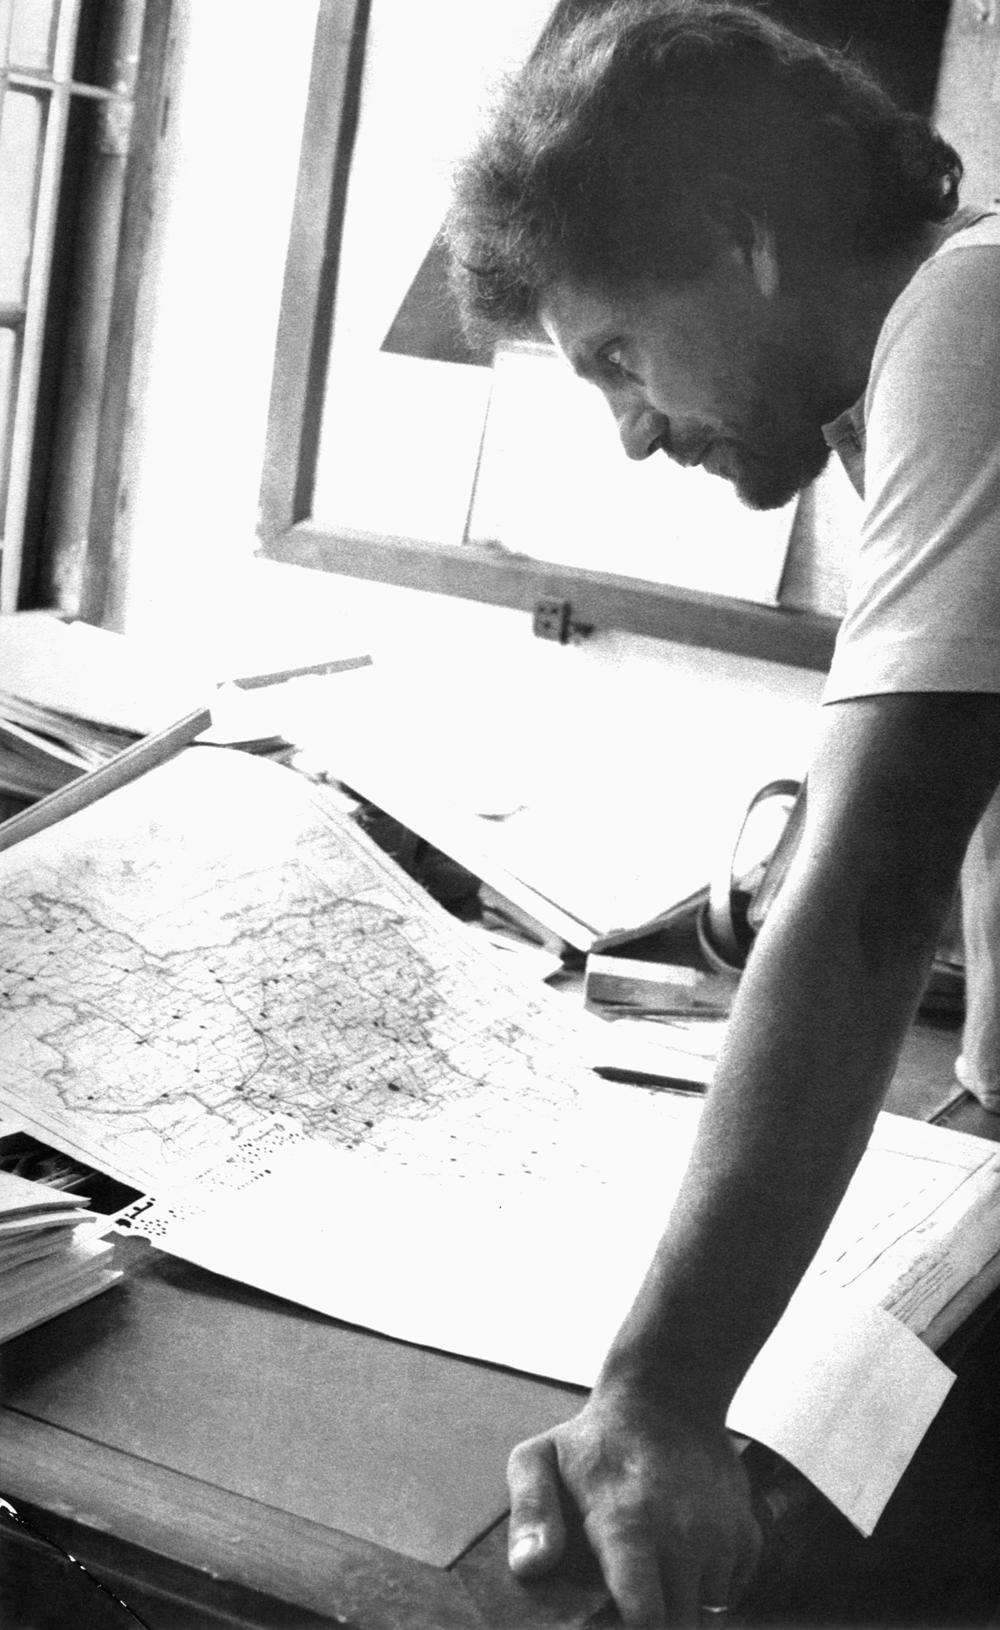 Daniel Tarantola analyzes a Bangladesh district map in 1975 that shows the locations of smallpox cases detected in the region.